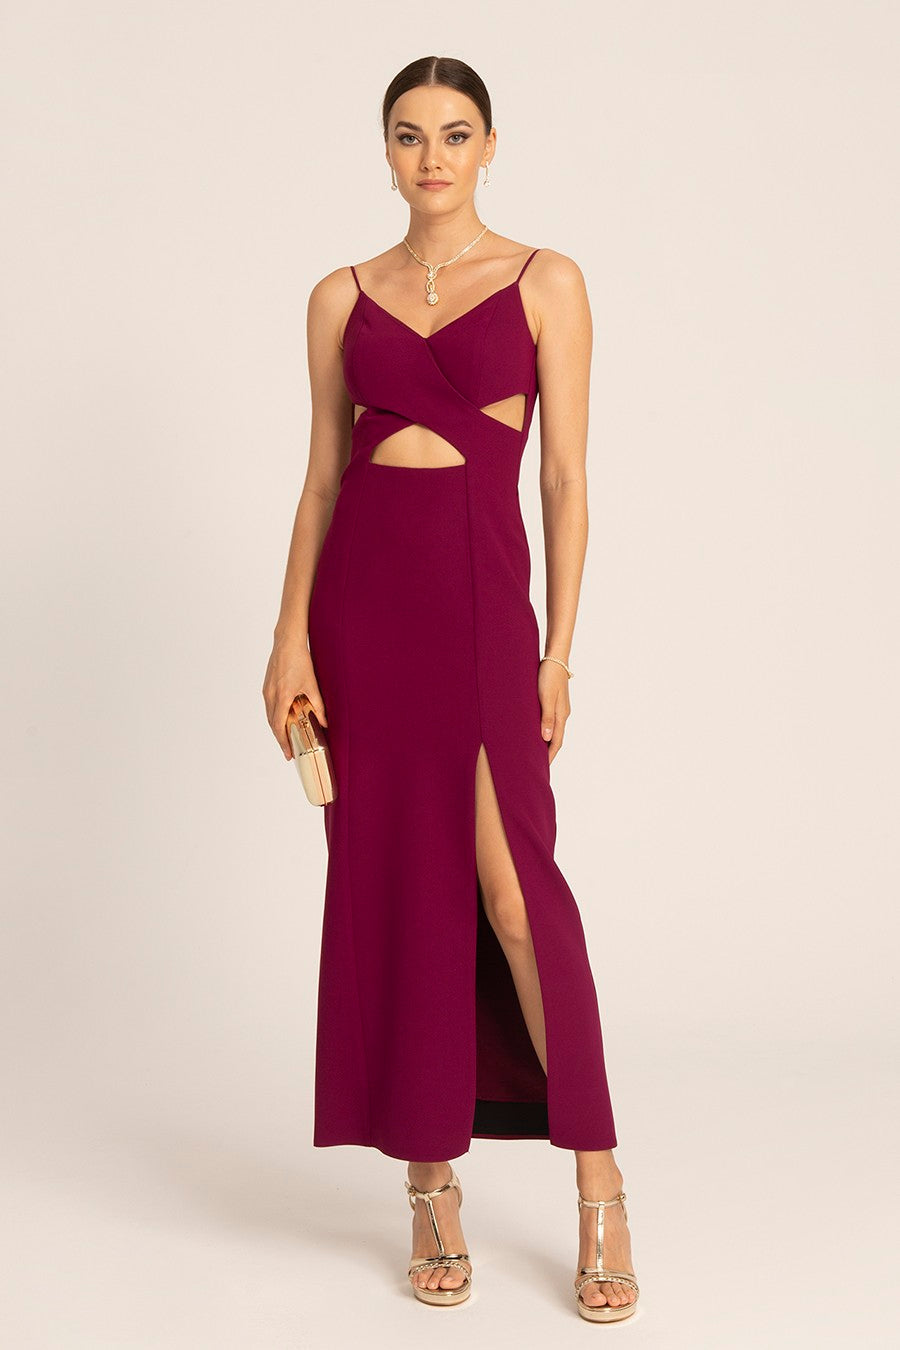 Mia - Mystic Evenings | Evening and Prom Dresses